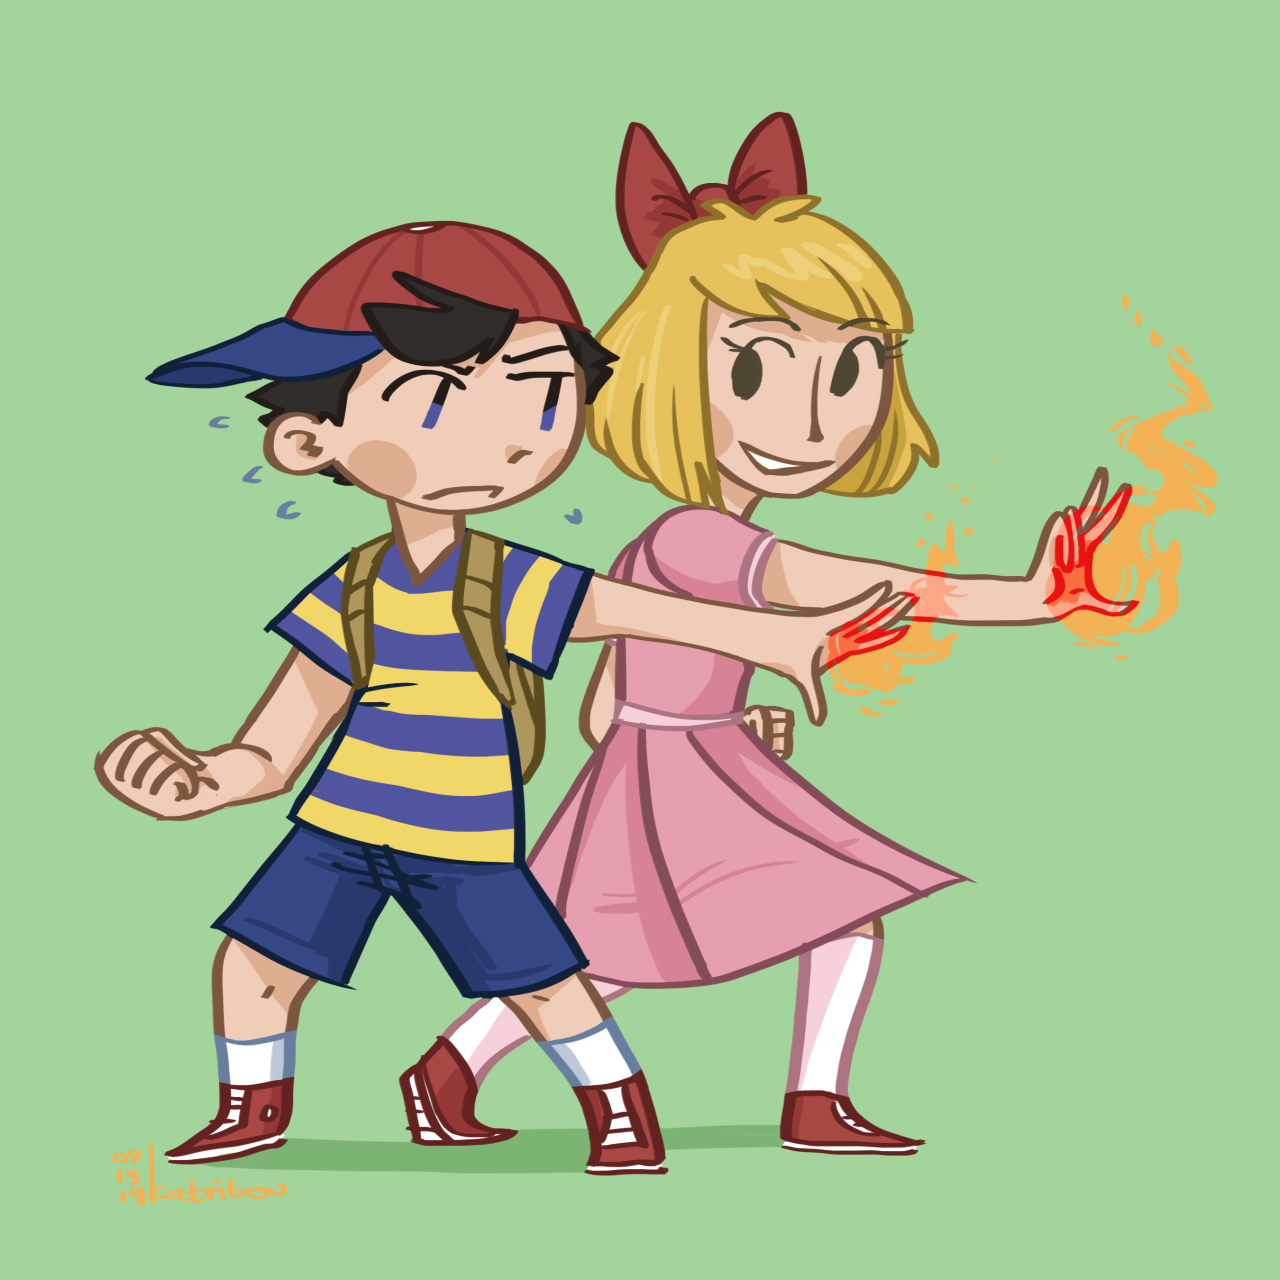 katribou:I imagine Paula would be happy to teach Ness some of her pk moves for smash